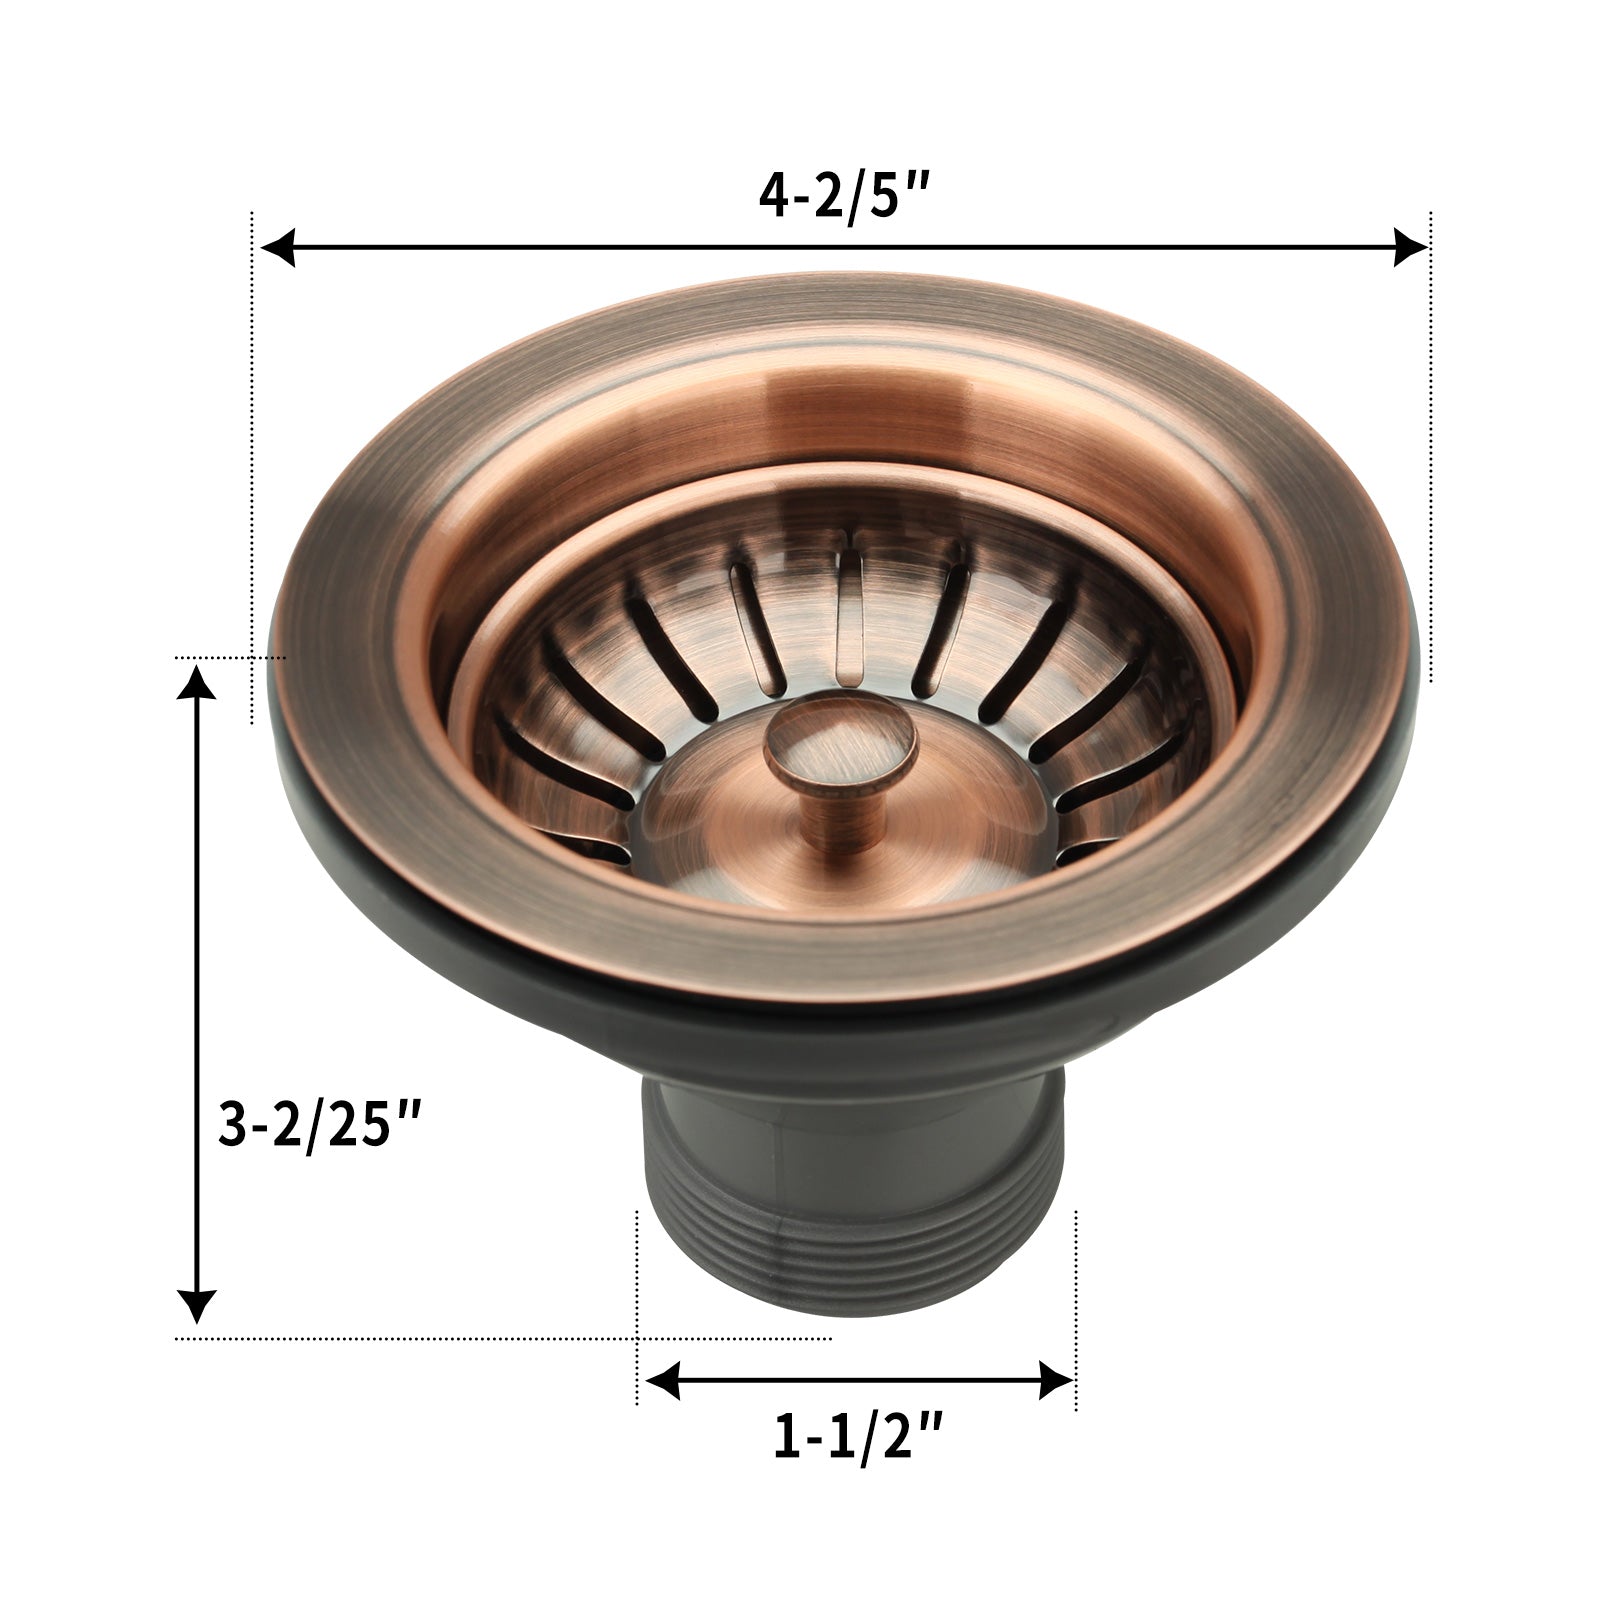 Antique Copper Kitchen Sink Stopper Replacement for 3-1/2 Inch Standard Strainer Drain - AK82102AC